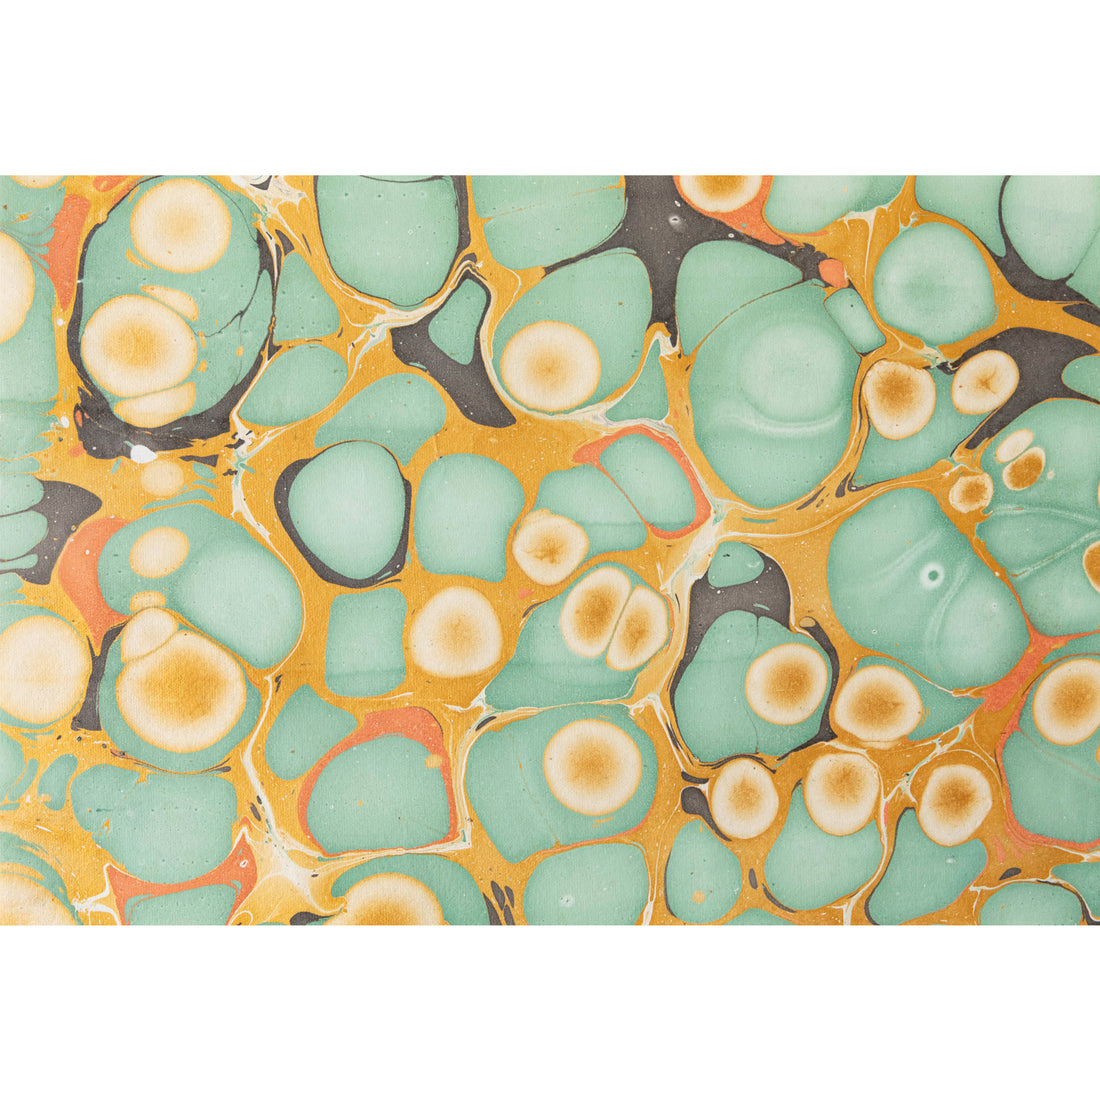 An abstract, marbled pattern of large bubbles of seafoam, cream, dark grey and orange over shimmering gold.